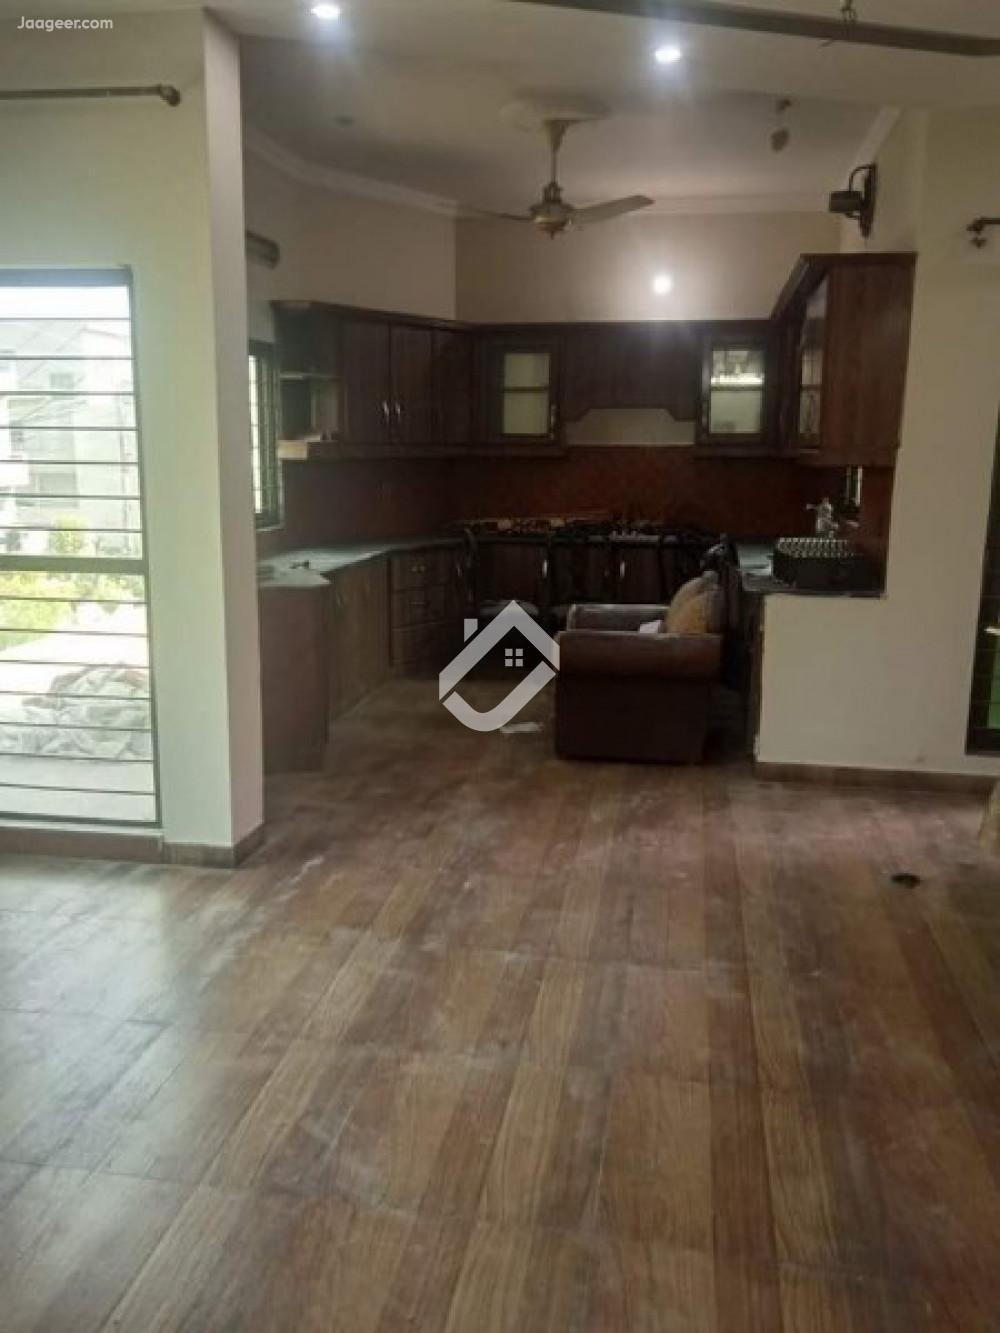 10 Marla House For Rent In Architect Society in Architect Society, Lahore